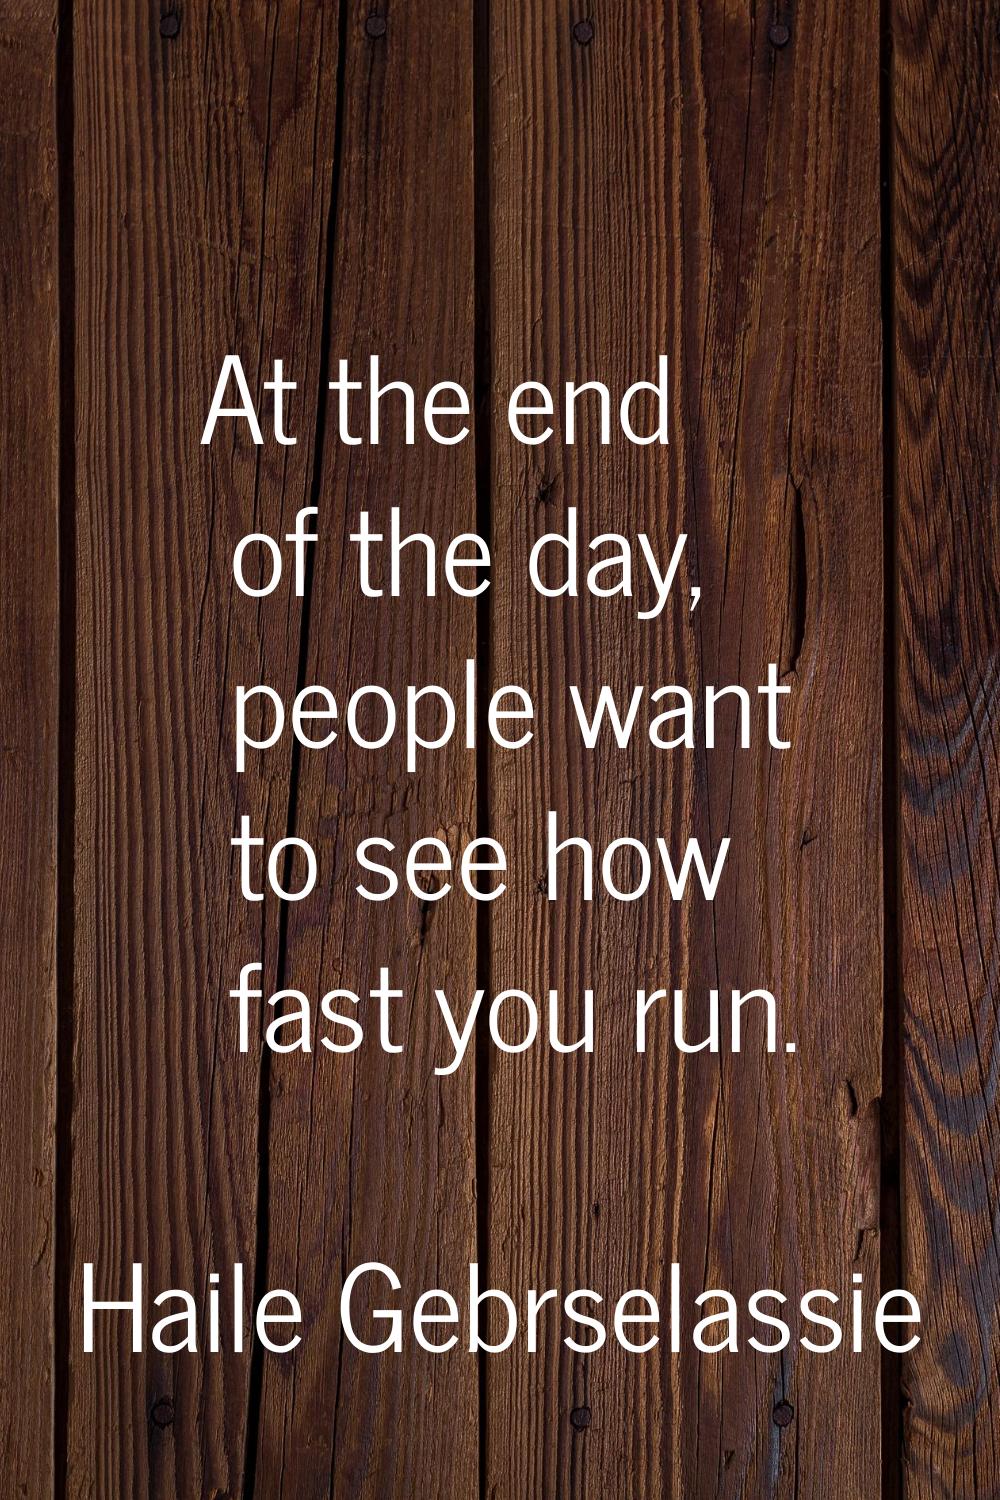 At the end of the day, people want to see how fast you run.